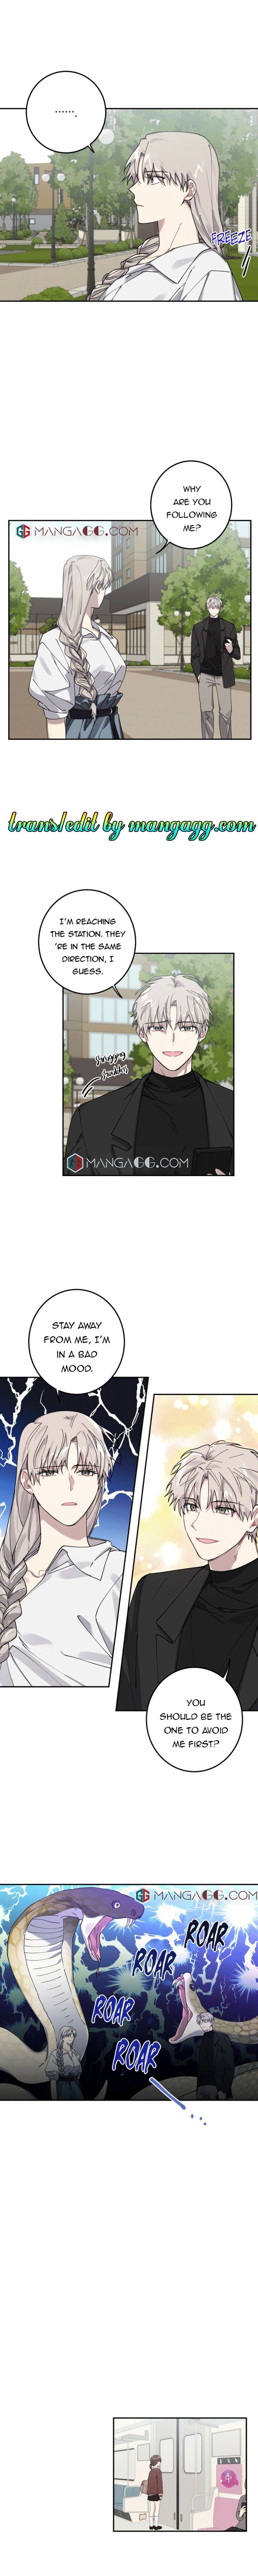 Love Is War! Chapter 7 - Page 3